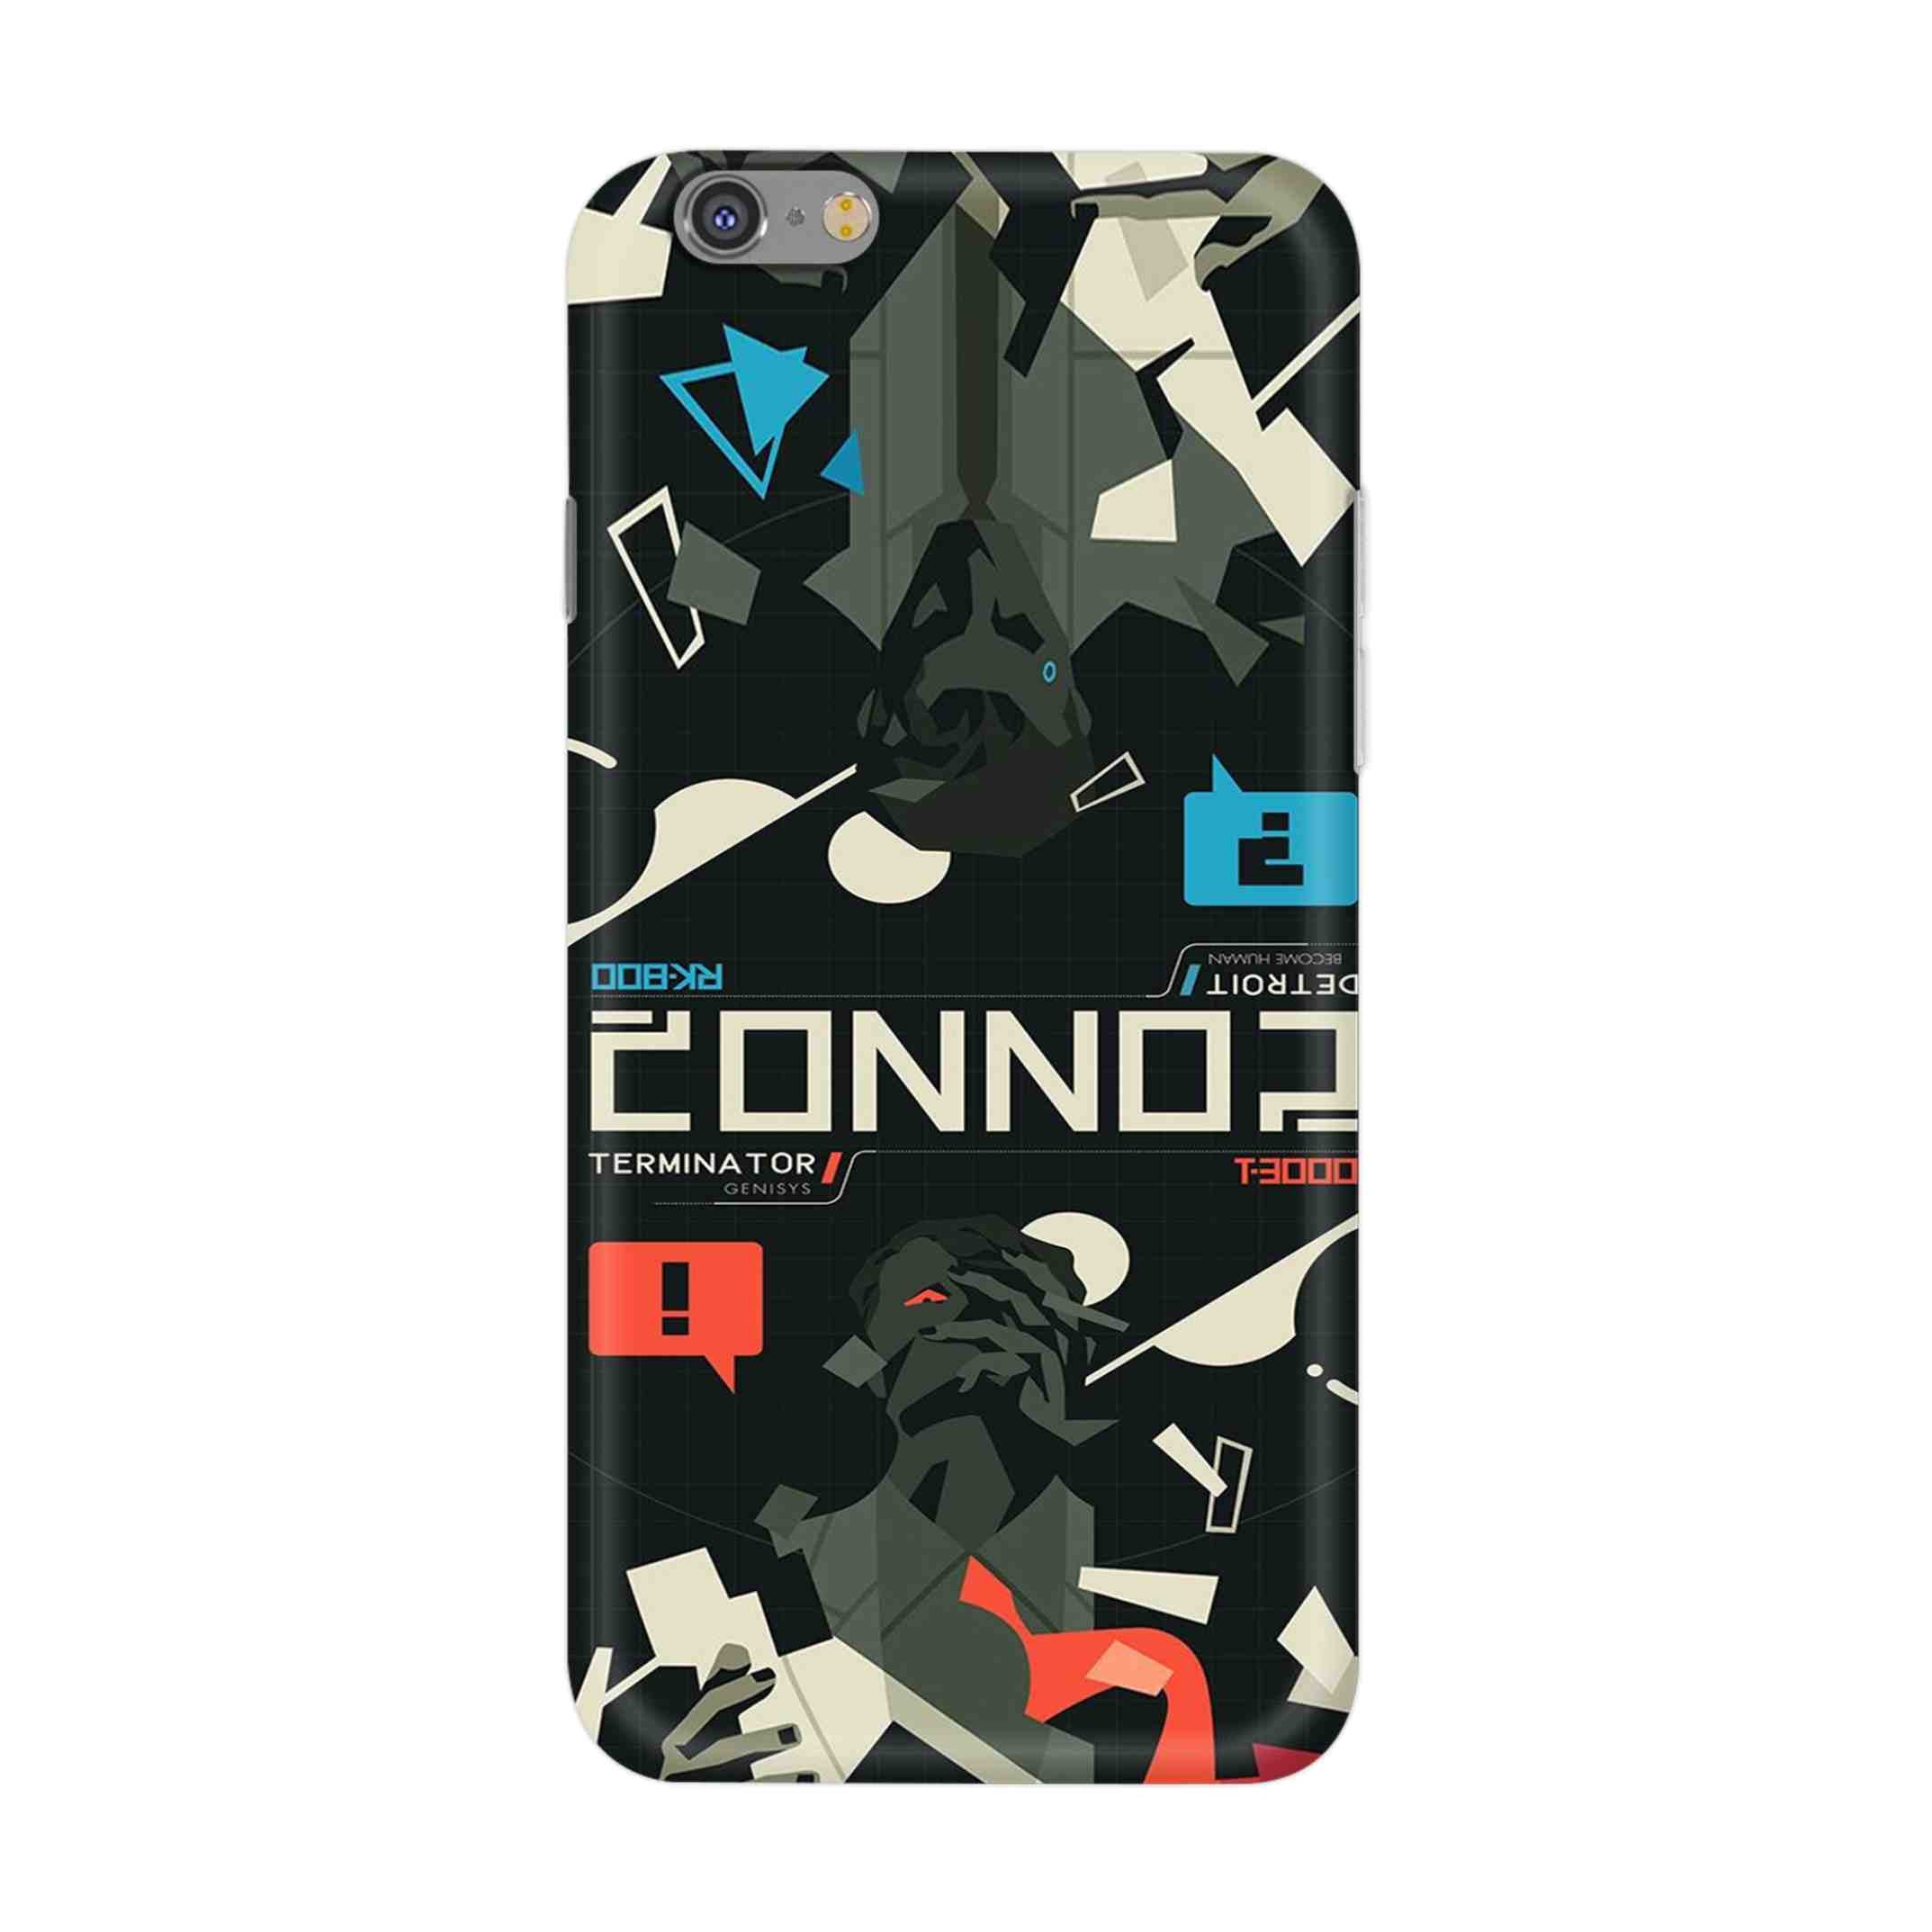 Buy Terminator Hard Back Mobile Phone Case/Cover For iPhone 6 Plus / 6s Plus Online